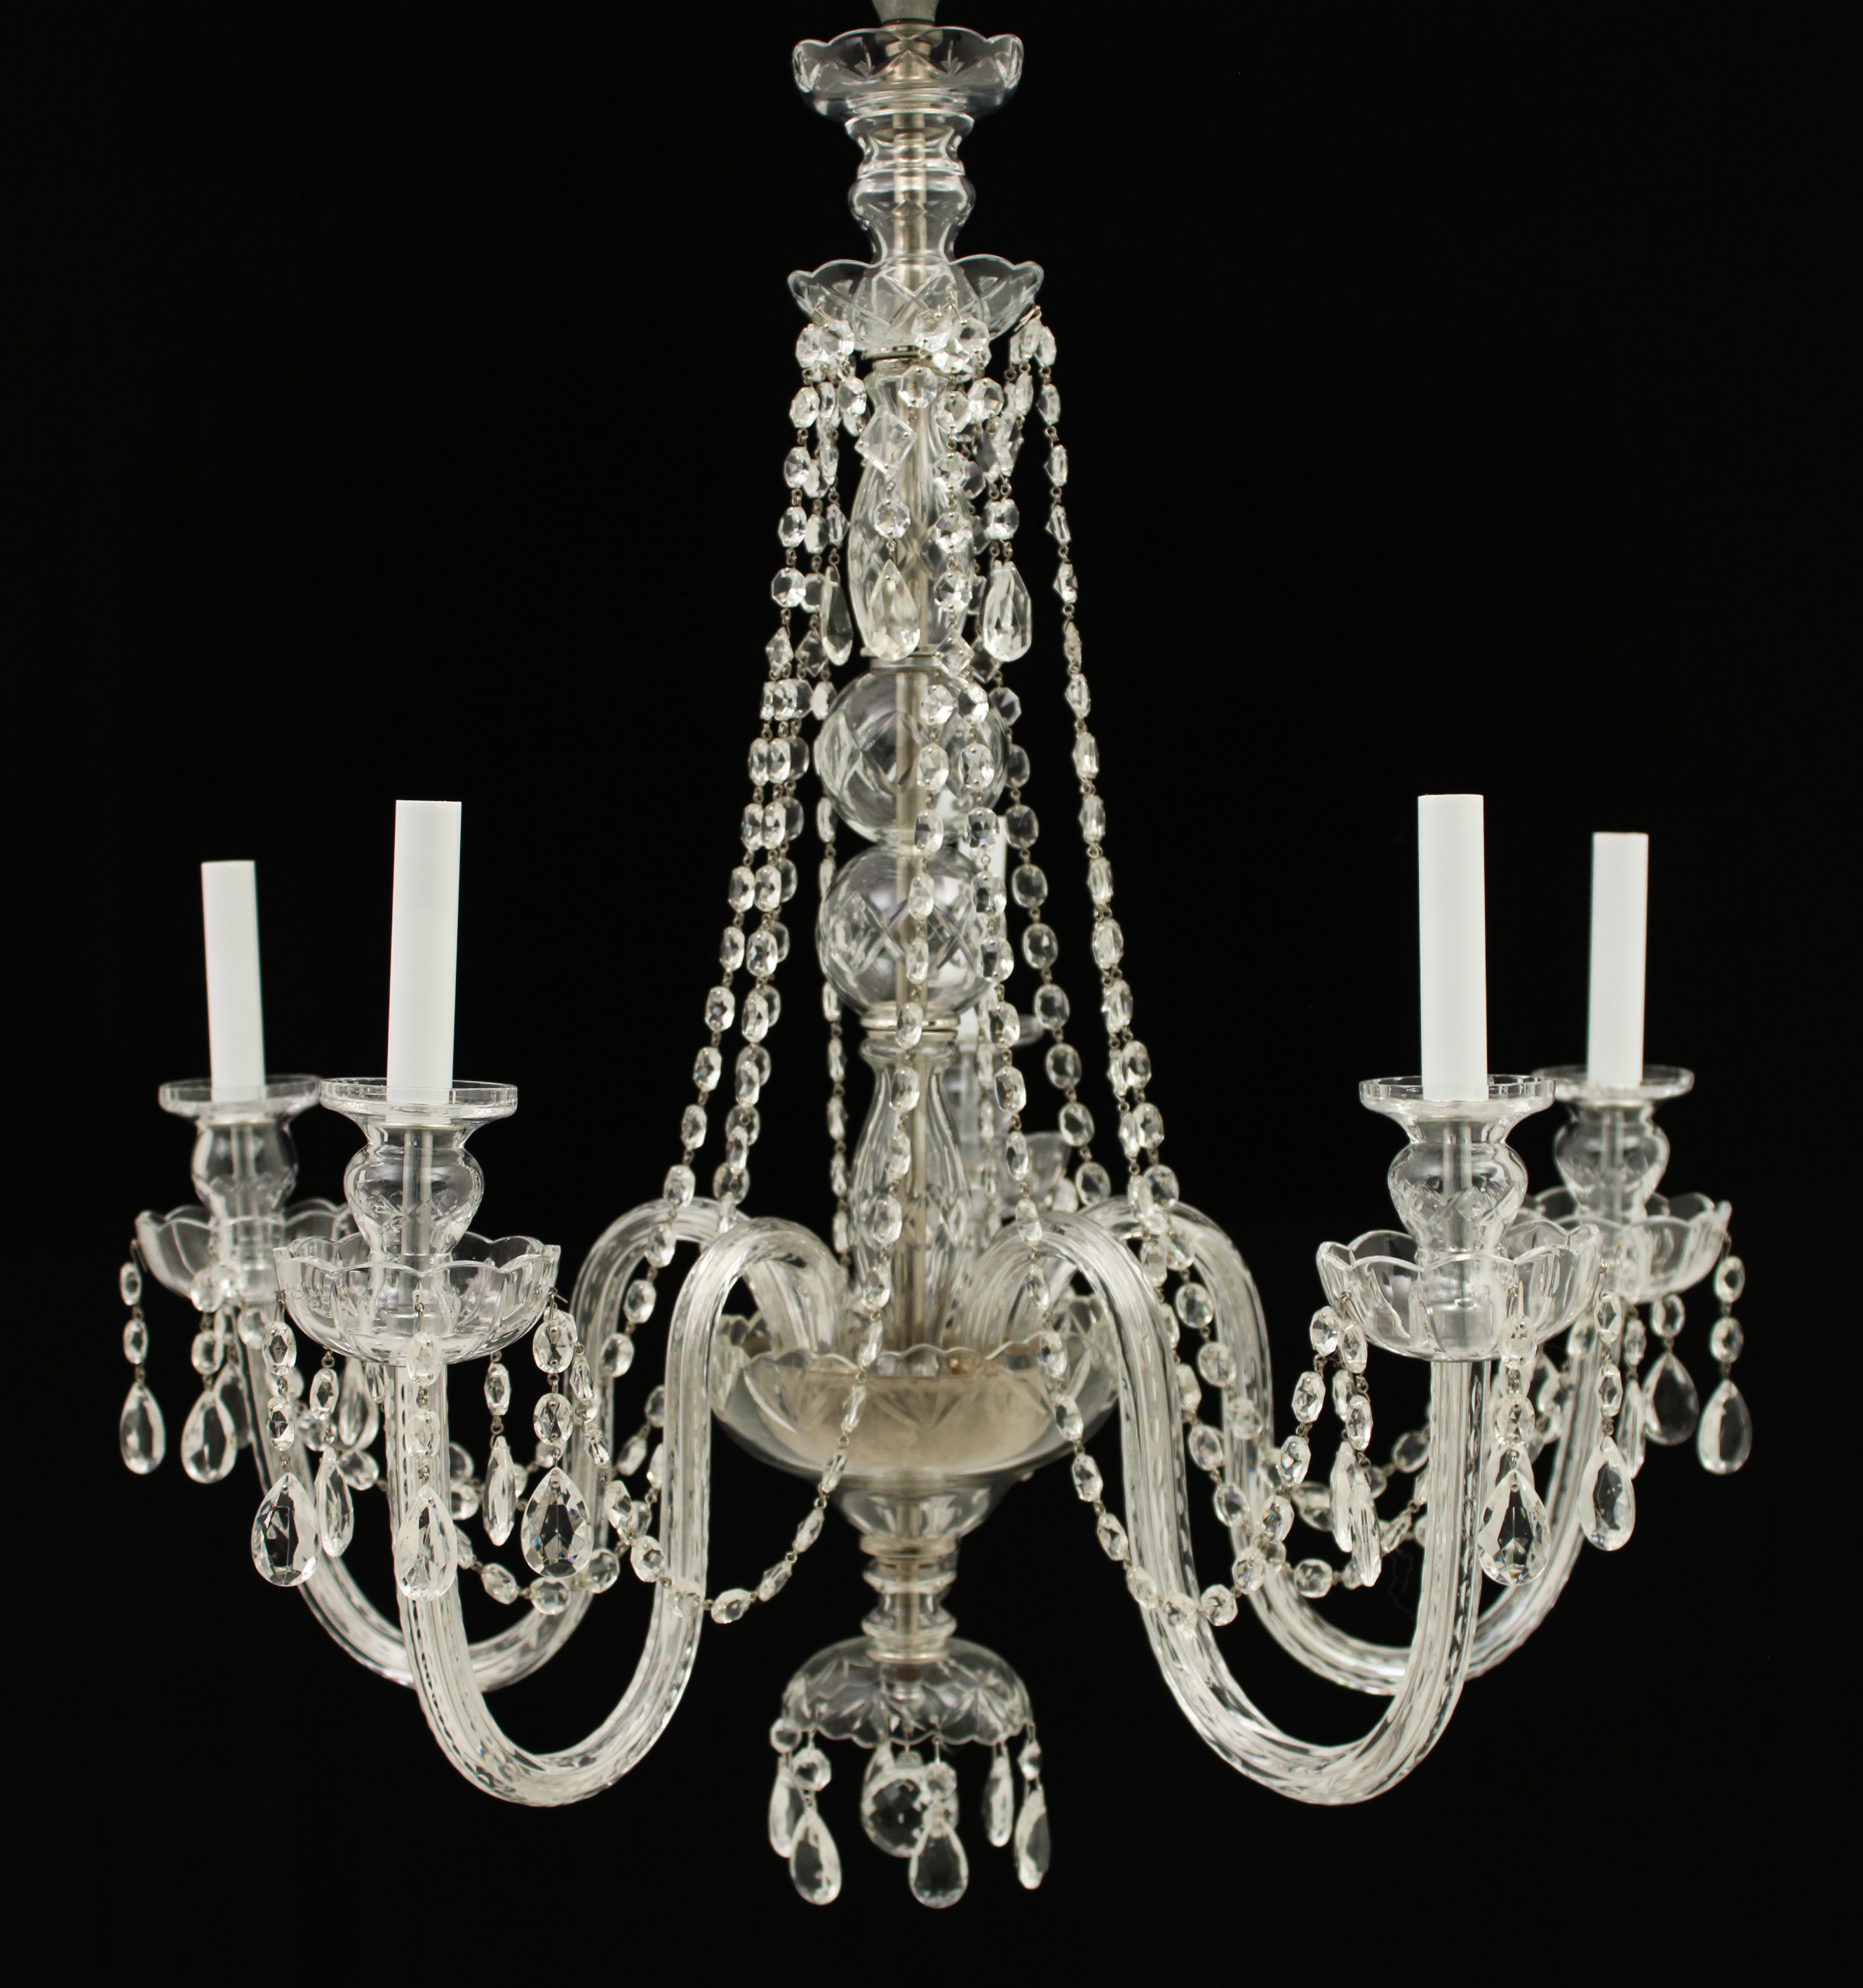 WATERFORD STYLE 5 LIGHT CRYSTAL